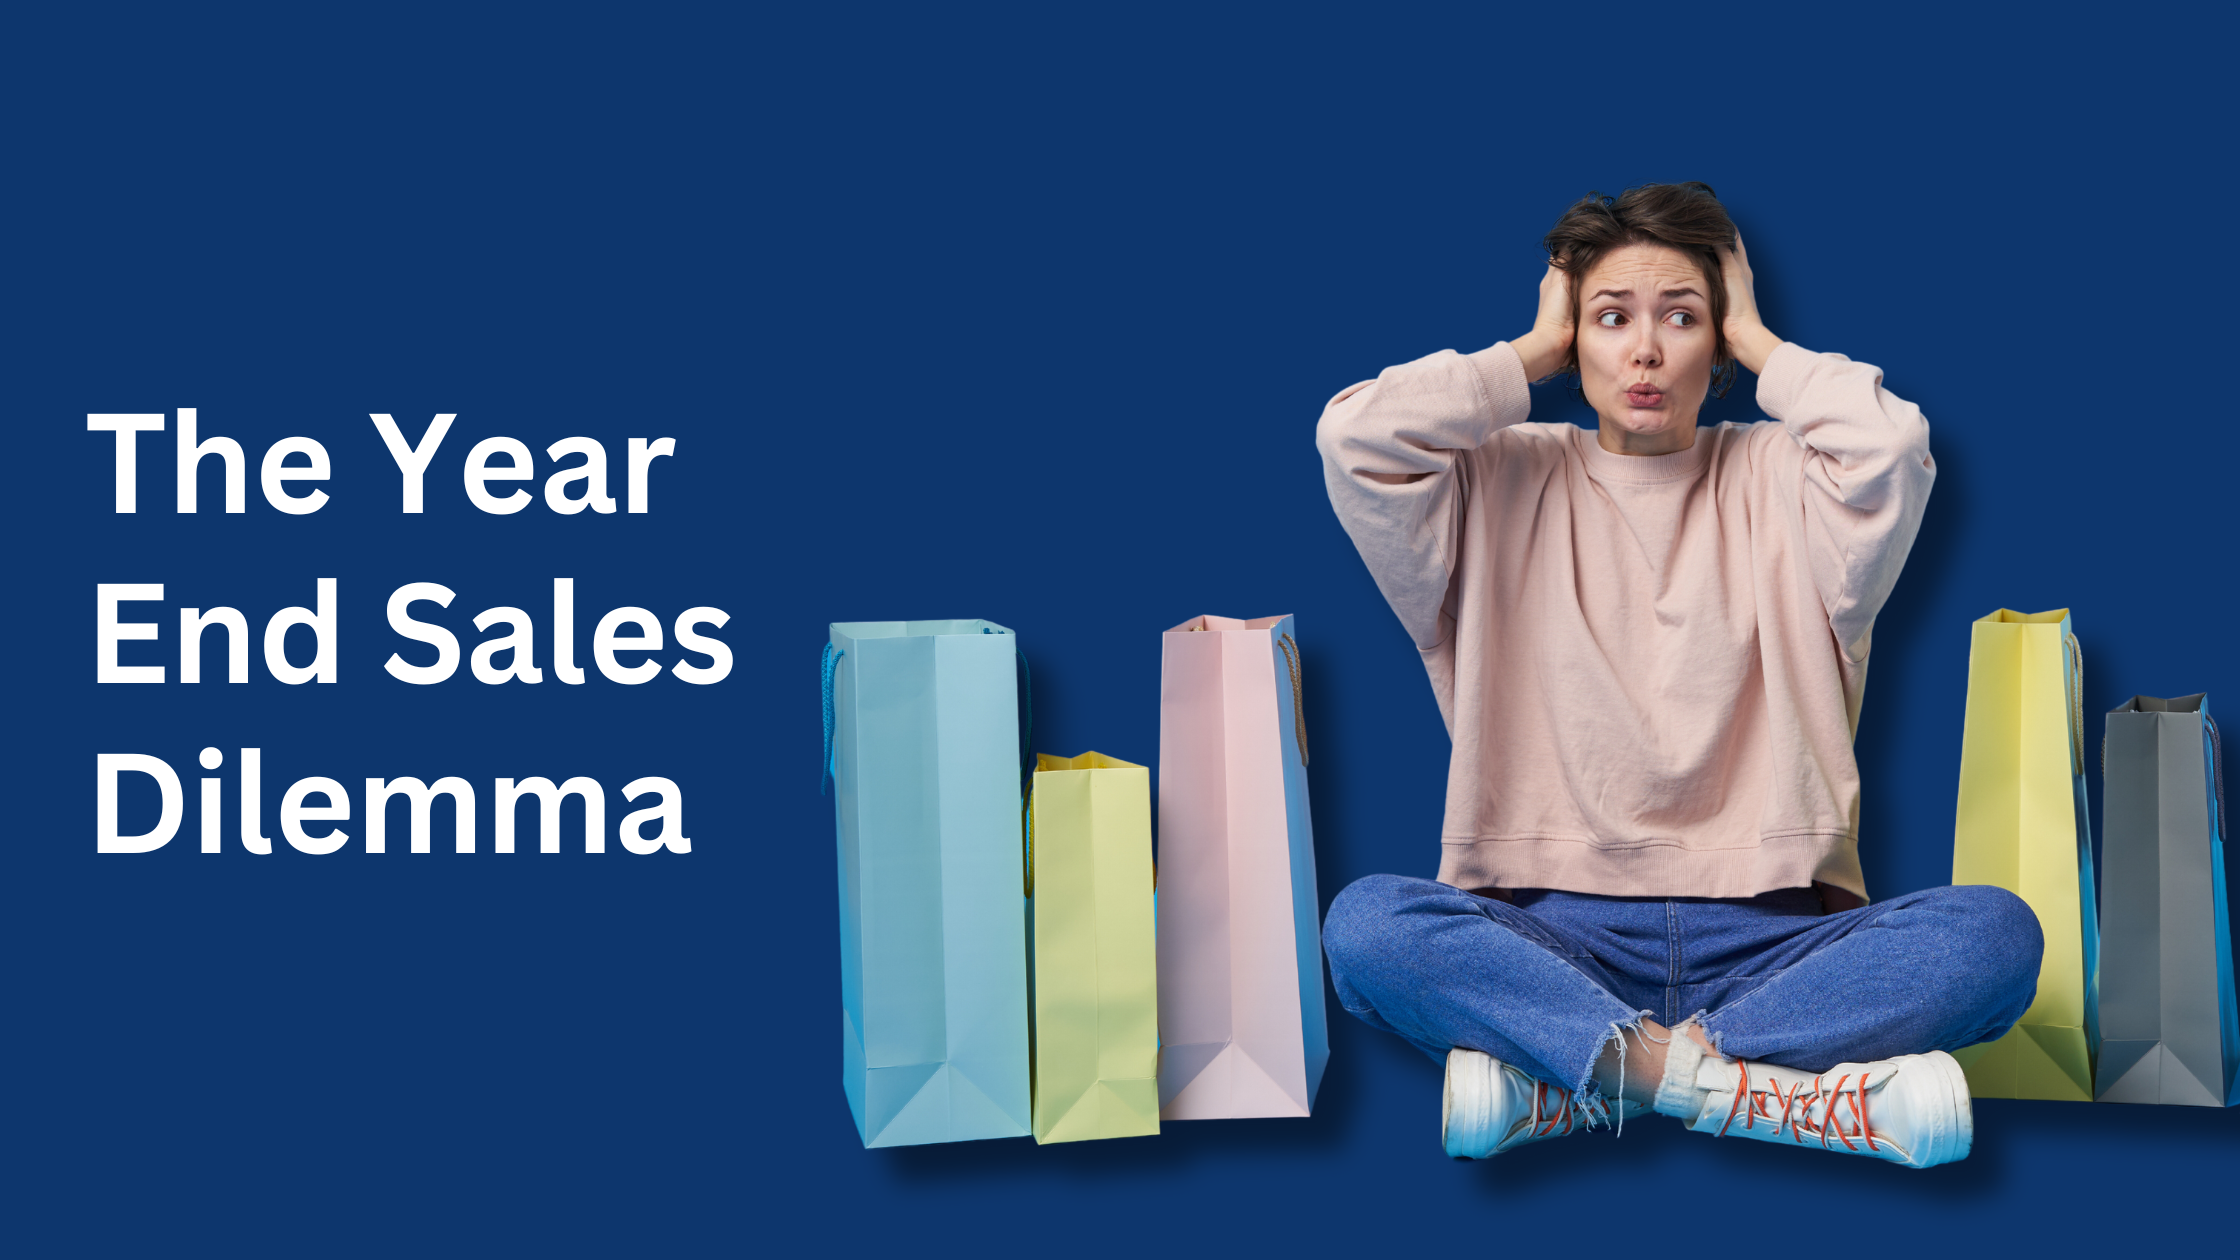 A visual representation of the 'Year-End Sale Dilemma,' featuring contrasting options for shoppers. The image conveys a decision-making scenario with choices between various discounted products and promotions, capturing the essence of the consumer's dilemma during a year-end sale event.